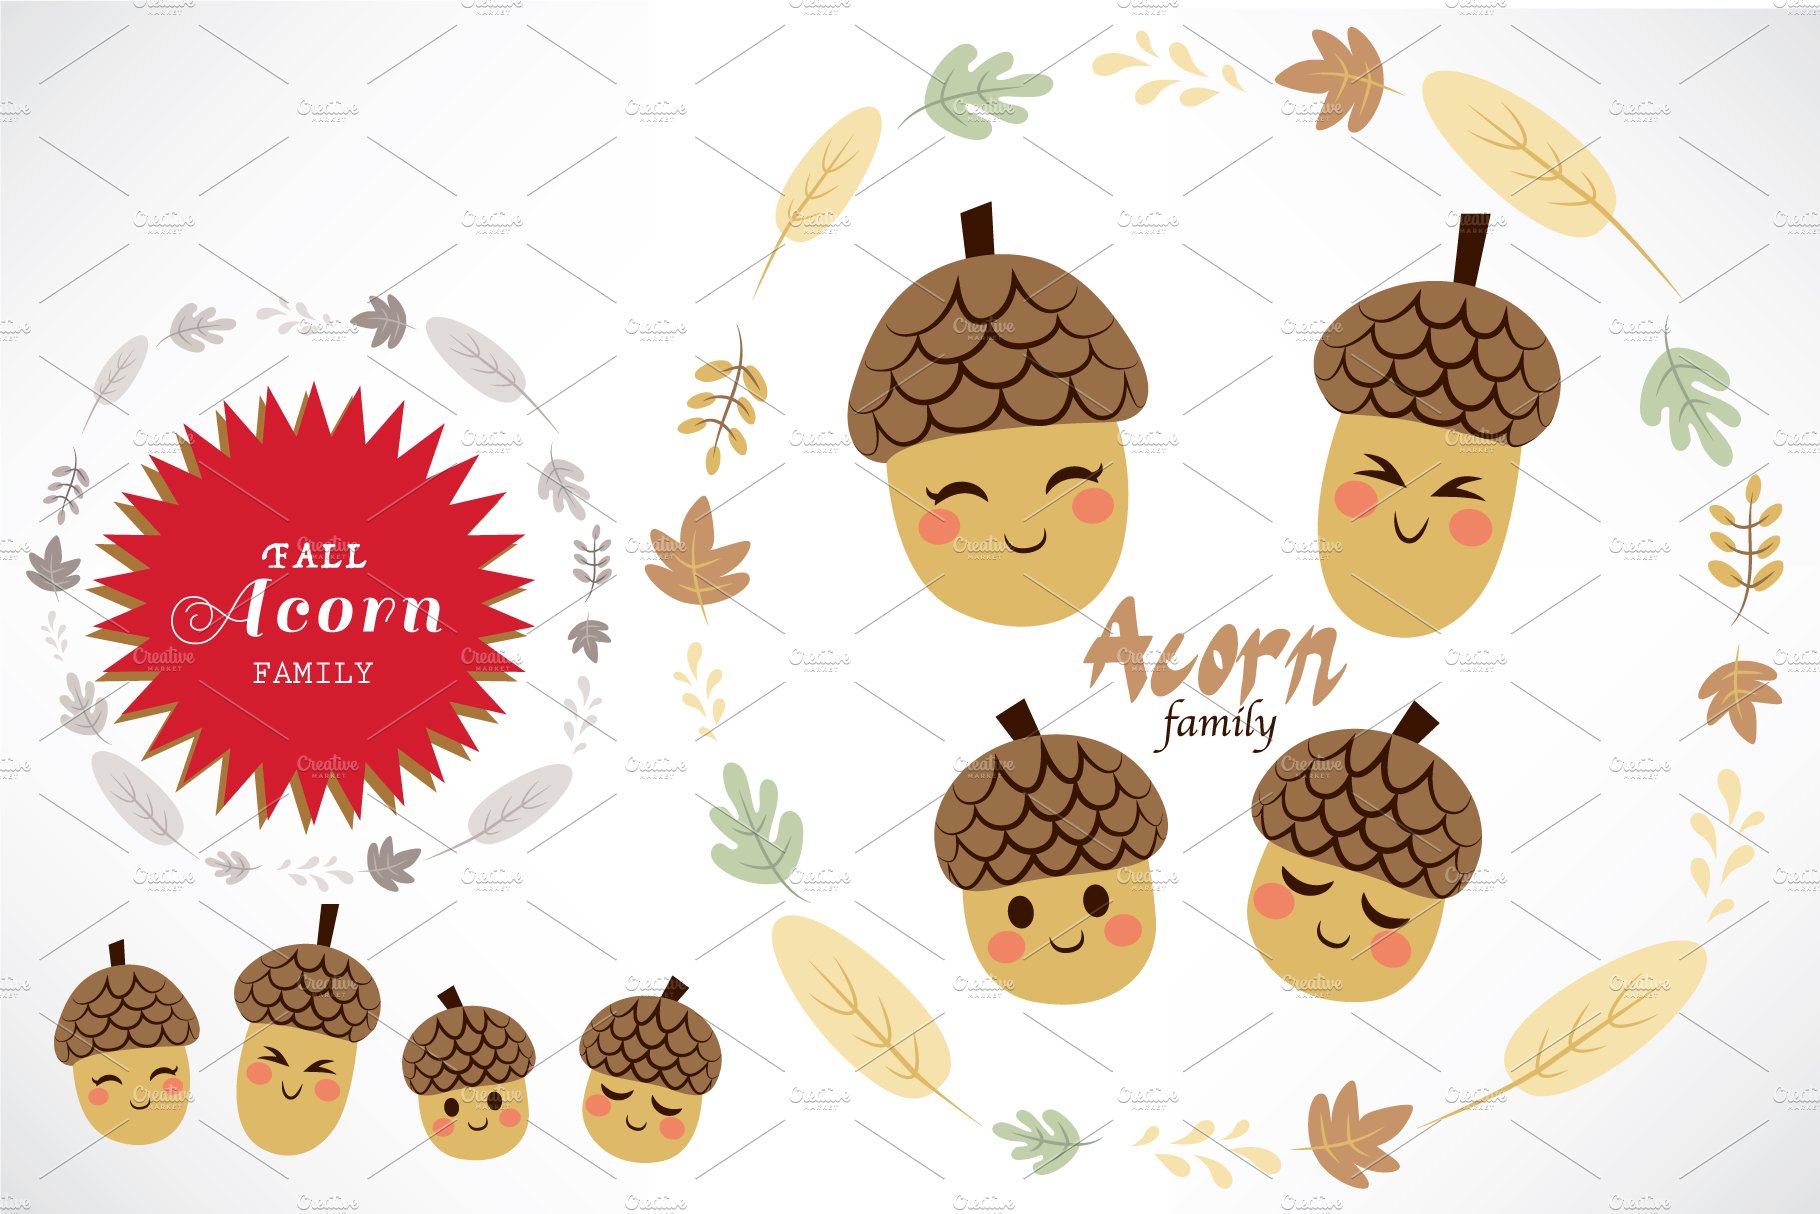 Fall Acorn Family cover image.